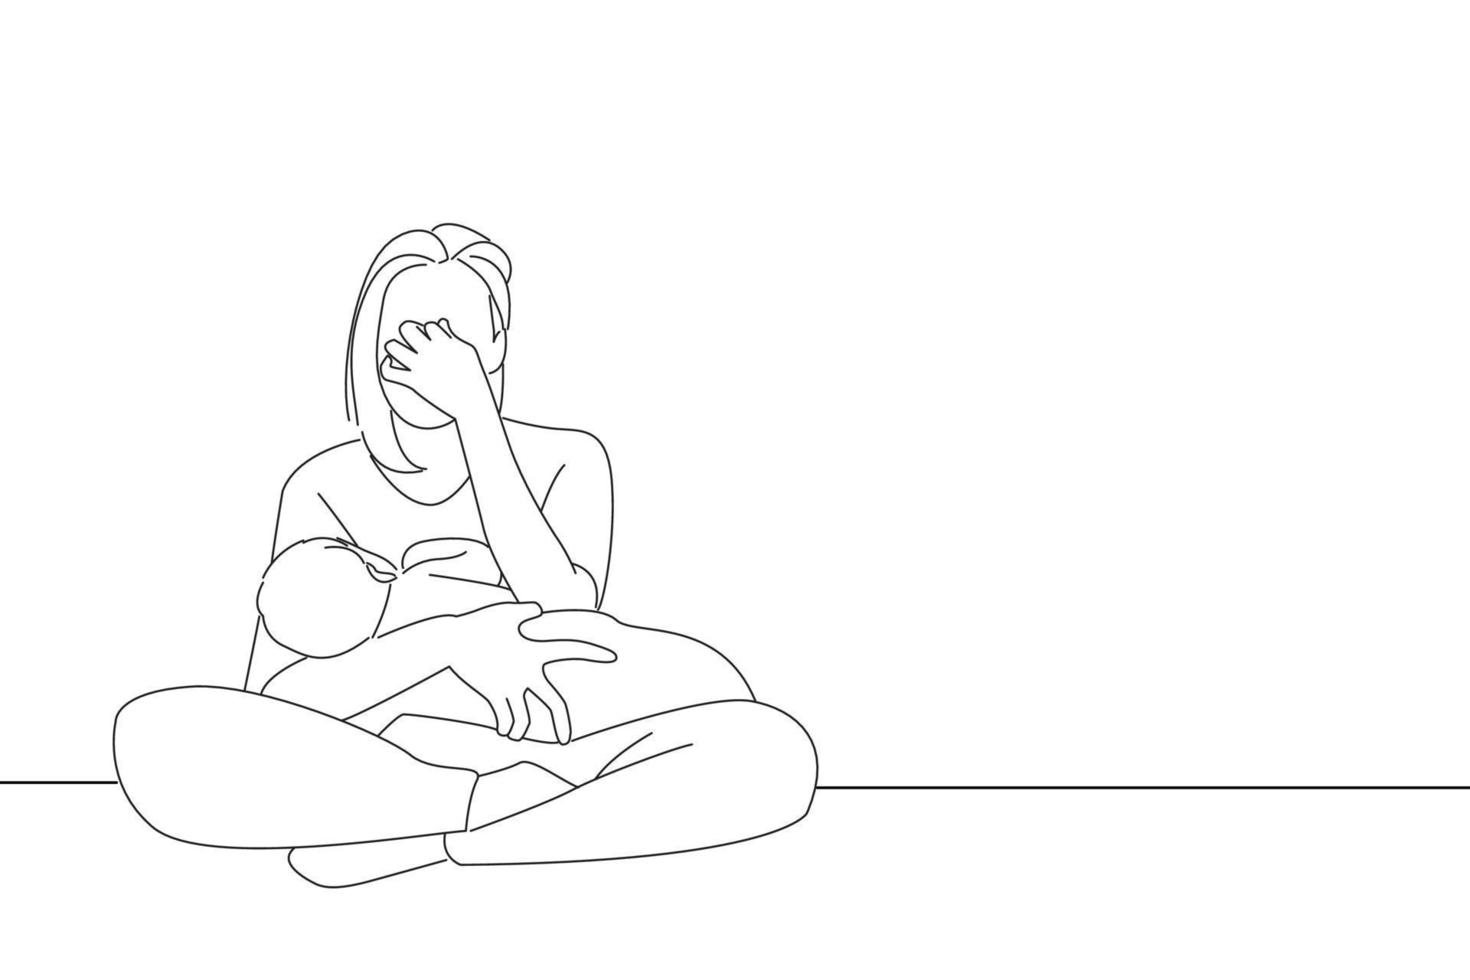 Cartoon of tired mother suffering from experiencing postnatal depression single mom motherhood stress. Outline drawing style art vector